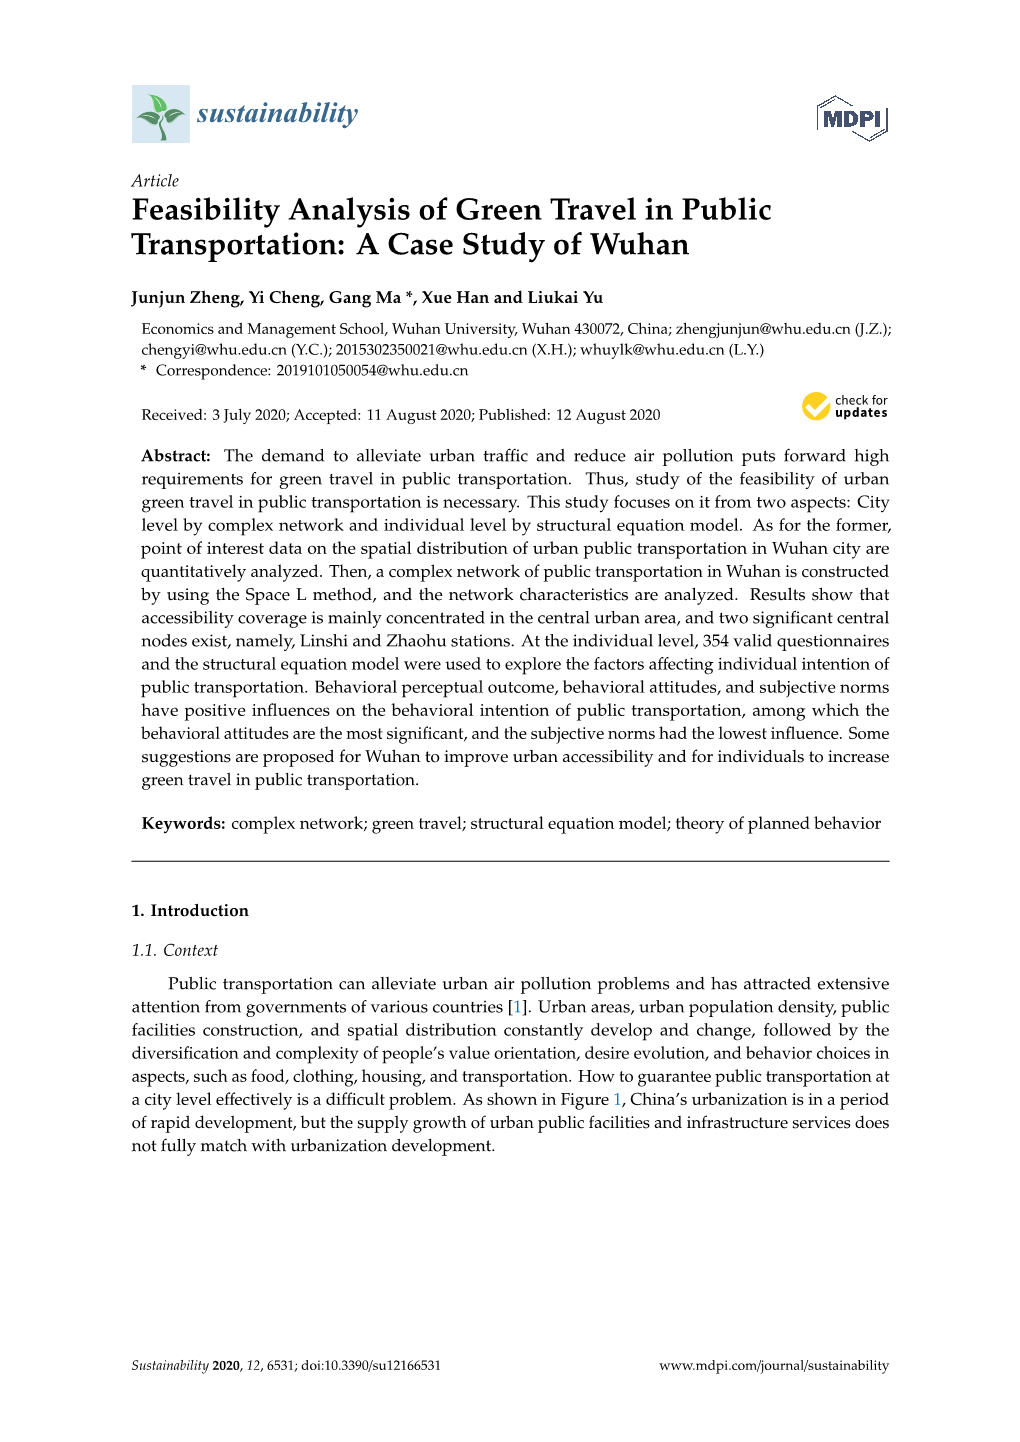 Feasibility Analysis of Green Travel in Public Transportation: a Case Study of Wuhan